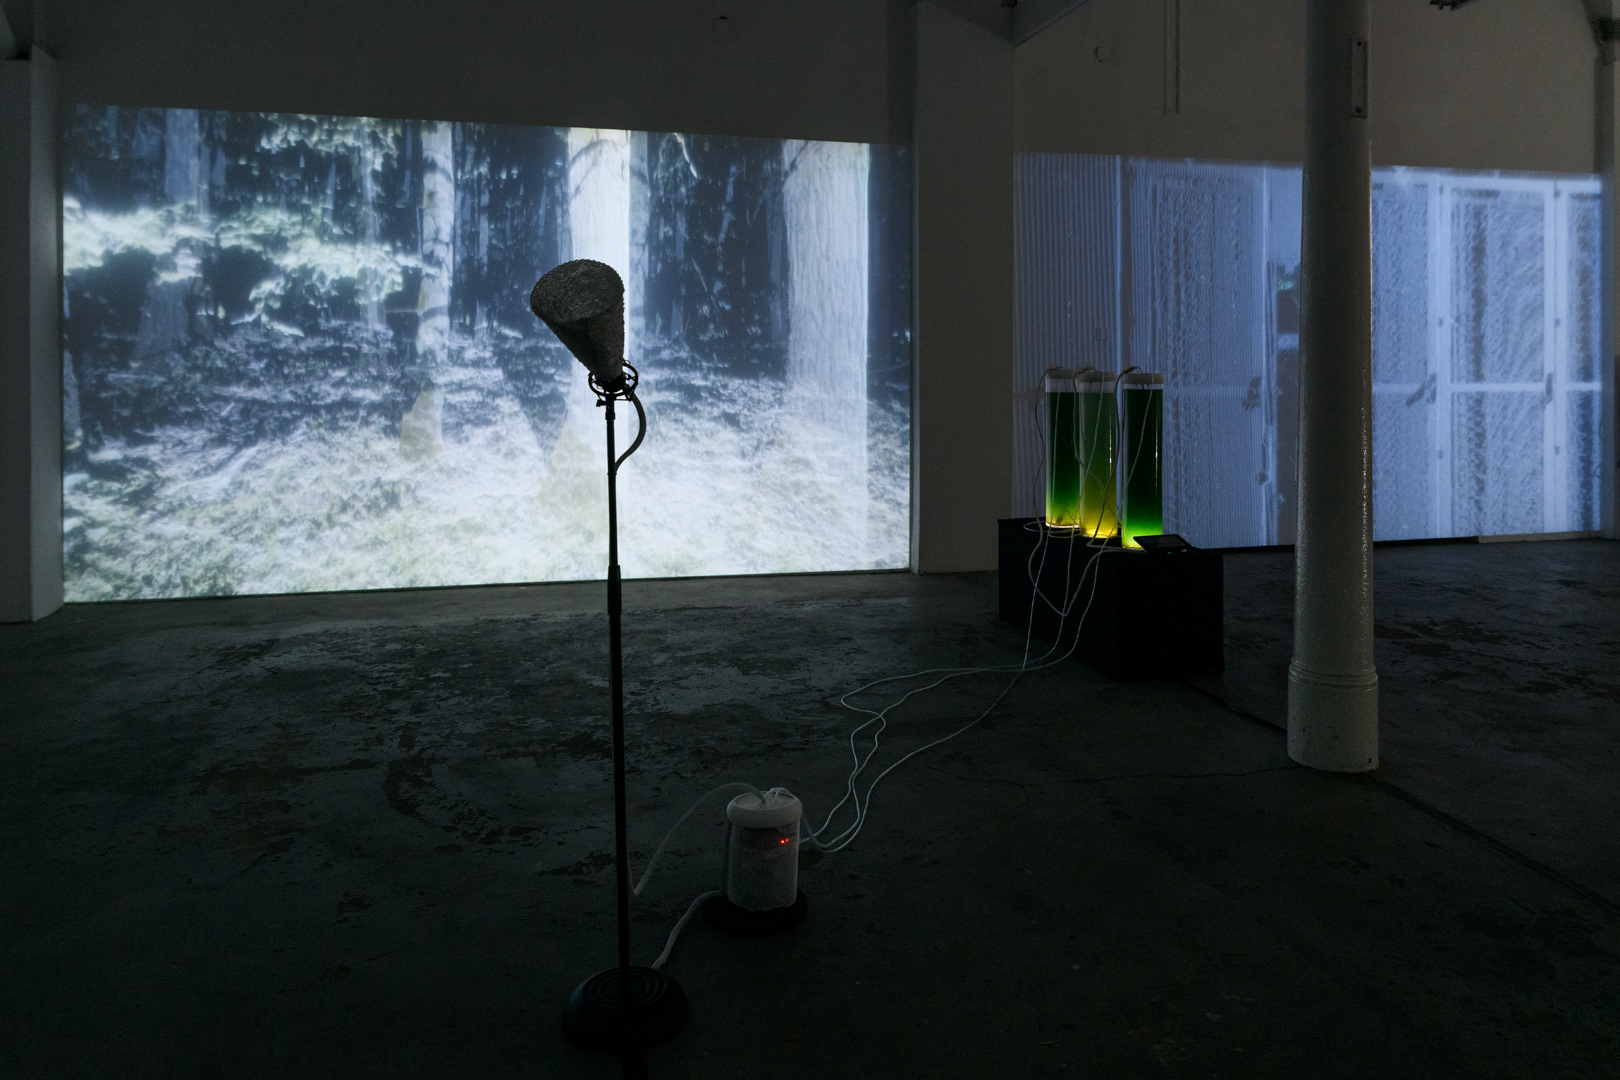 exhibition with 2 video projections and Algae